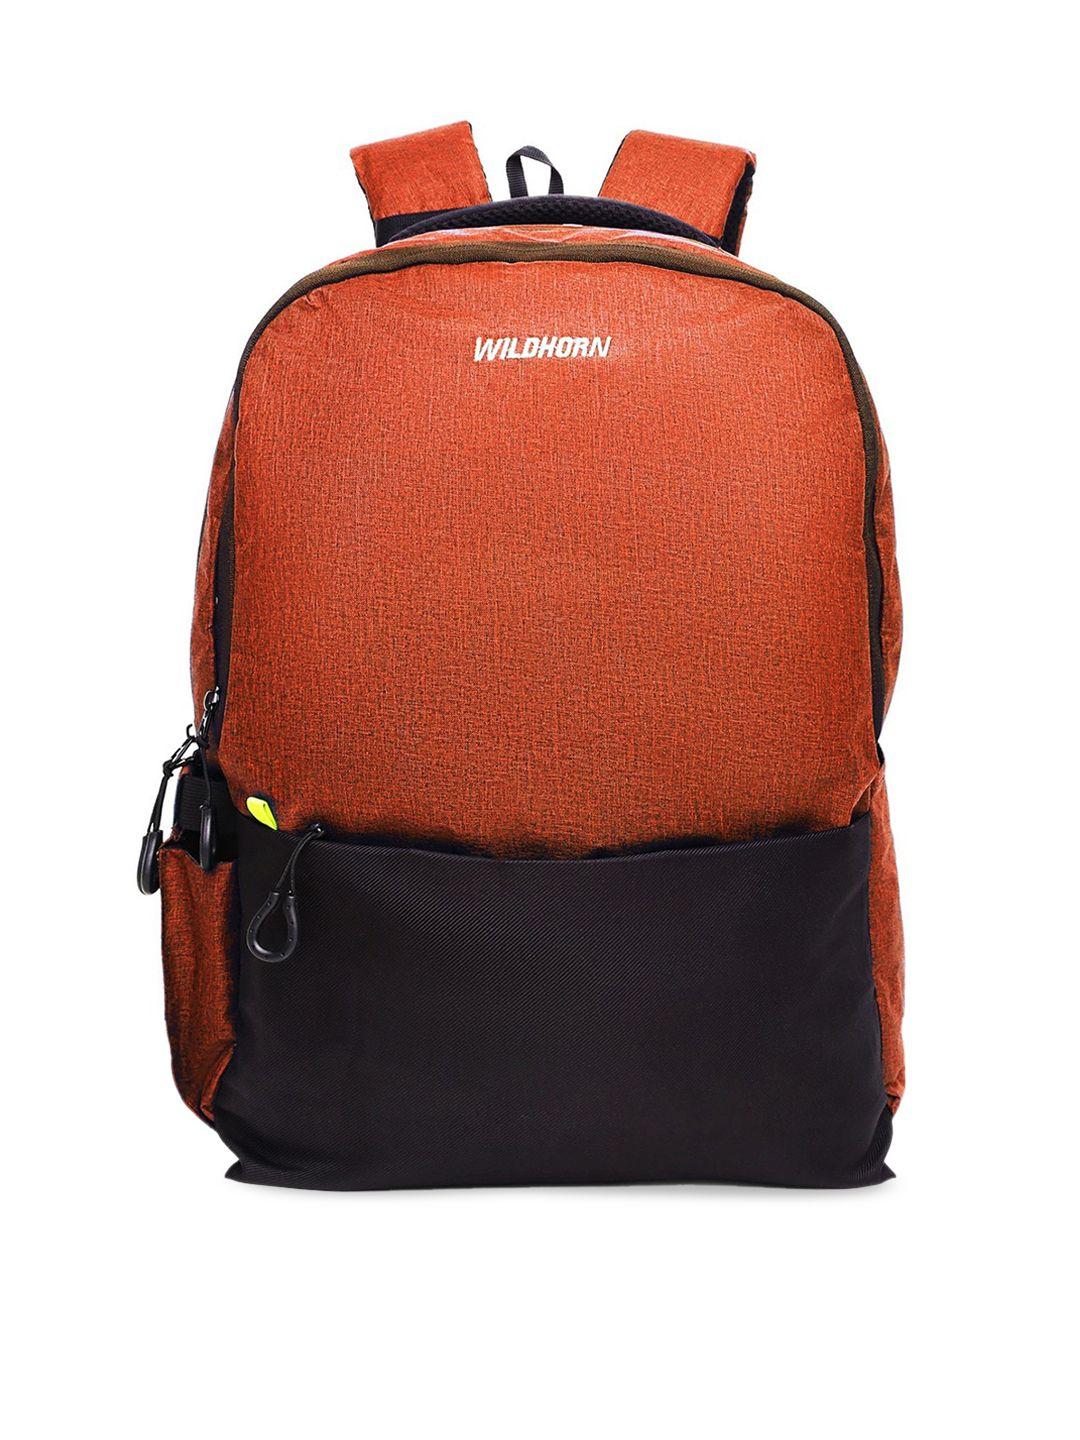 wildhorn unisex colourblocked backpack with compression straps